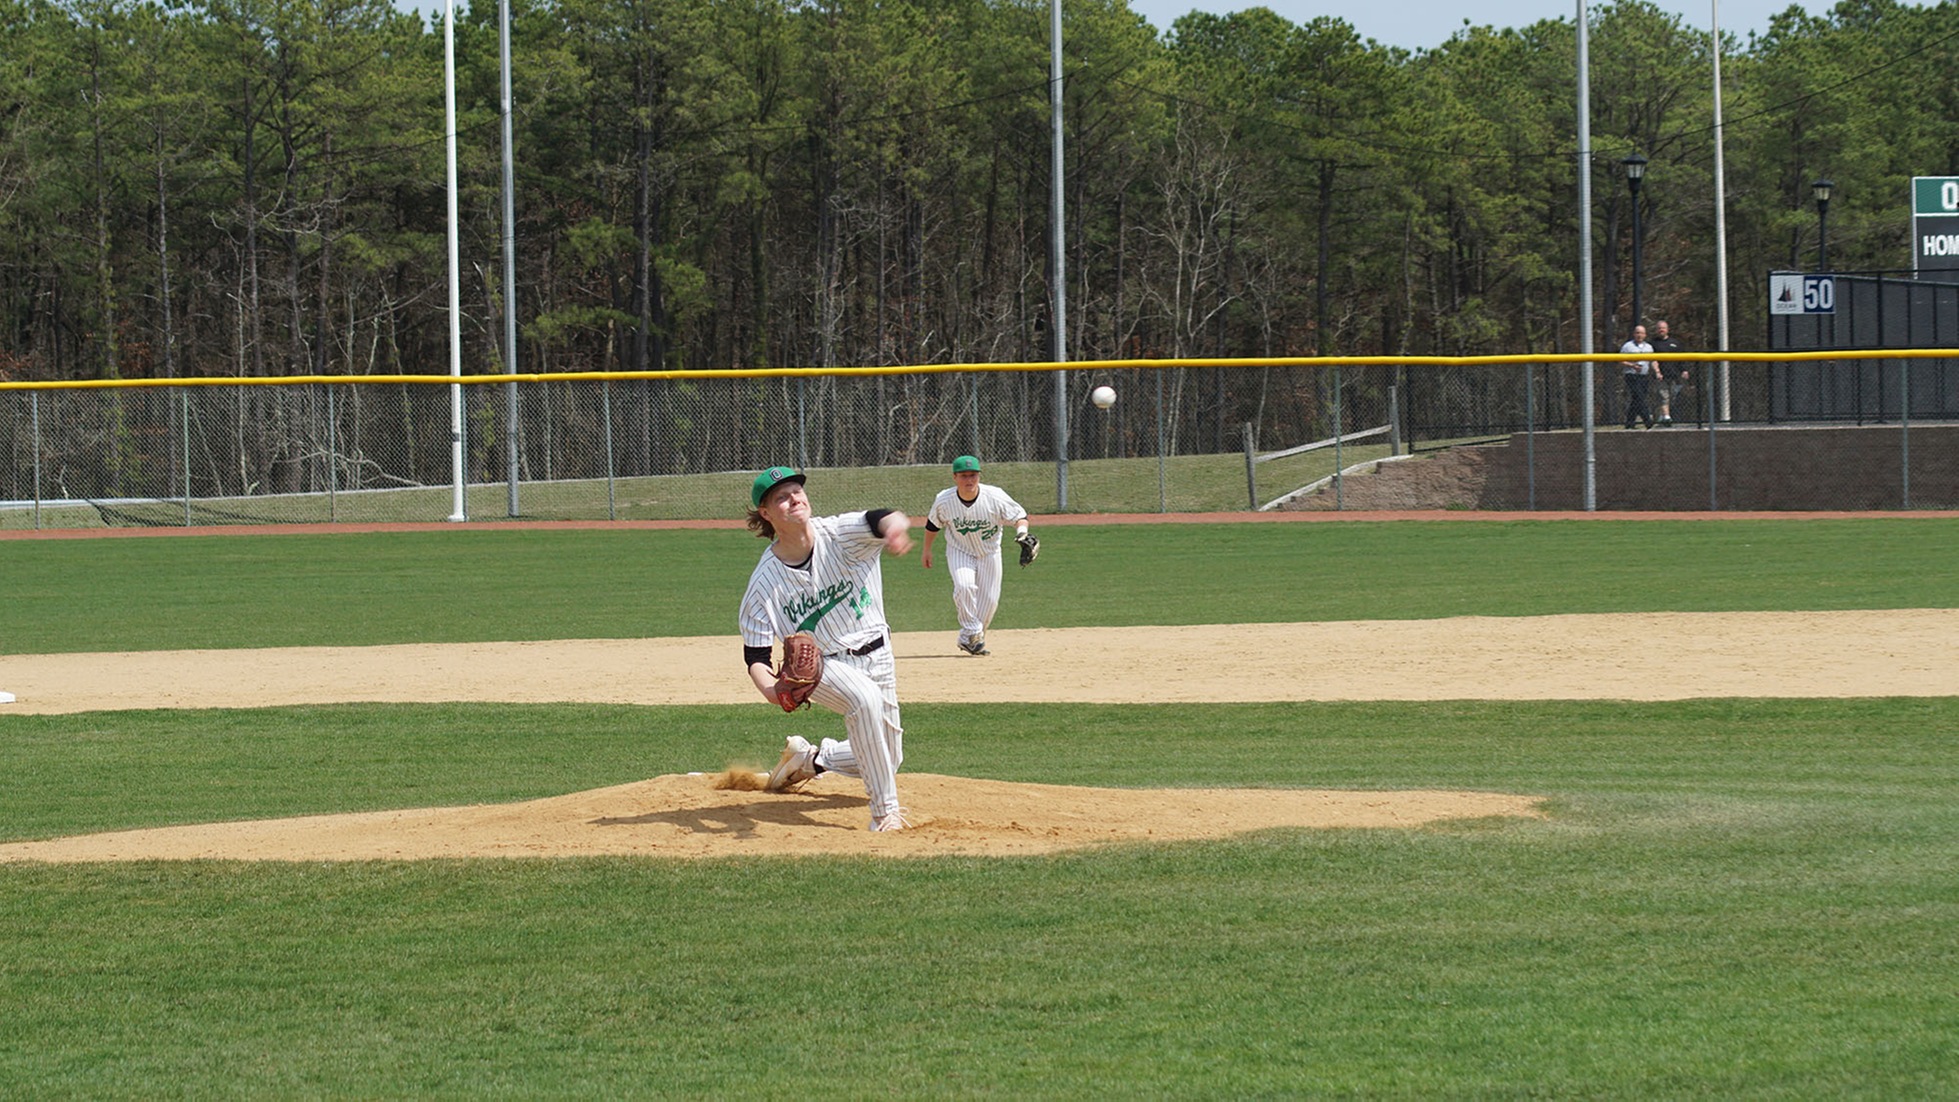 Vikings Lose Fifth Straight in Doubleheader Defeat by Rowan College at Burlington County